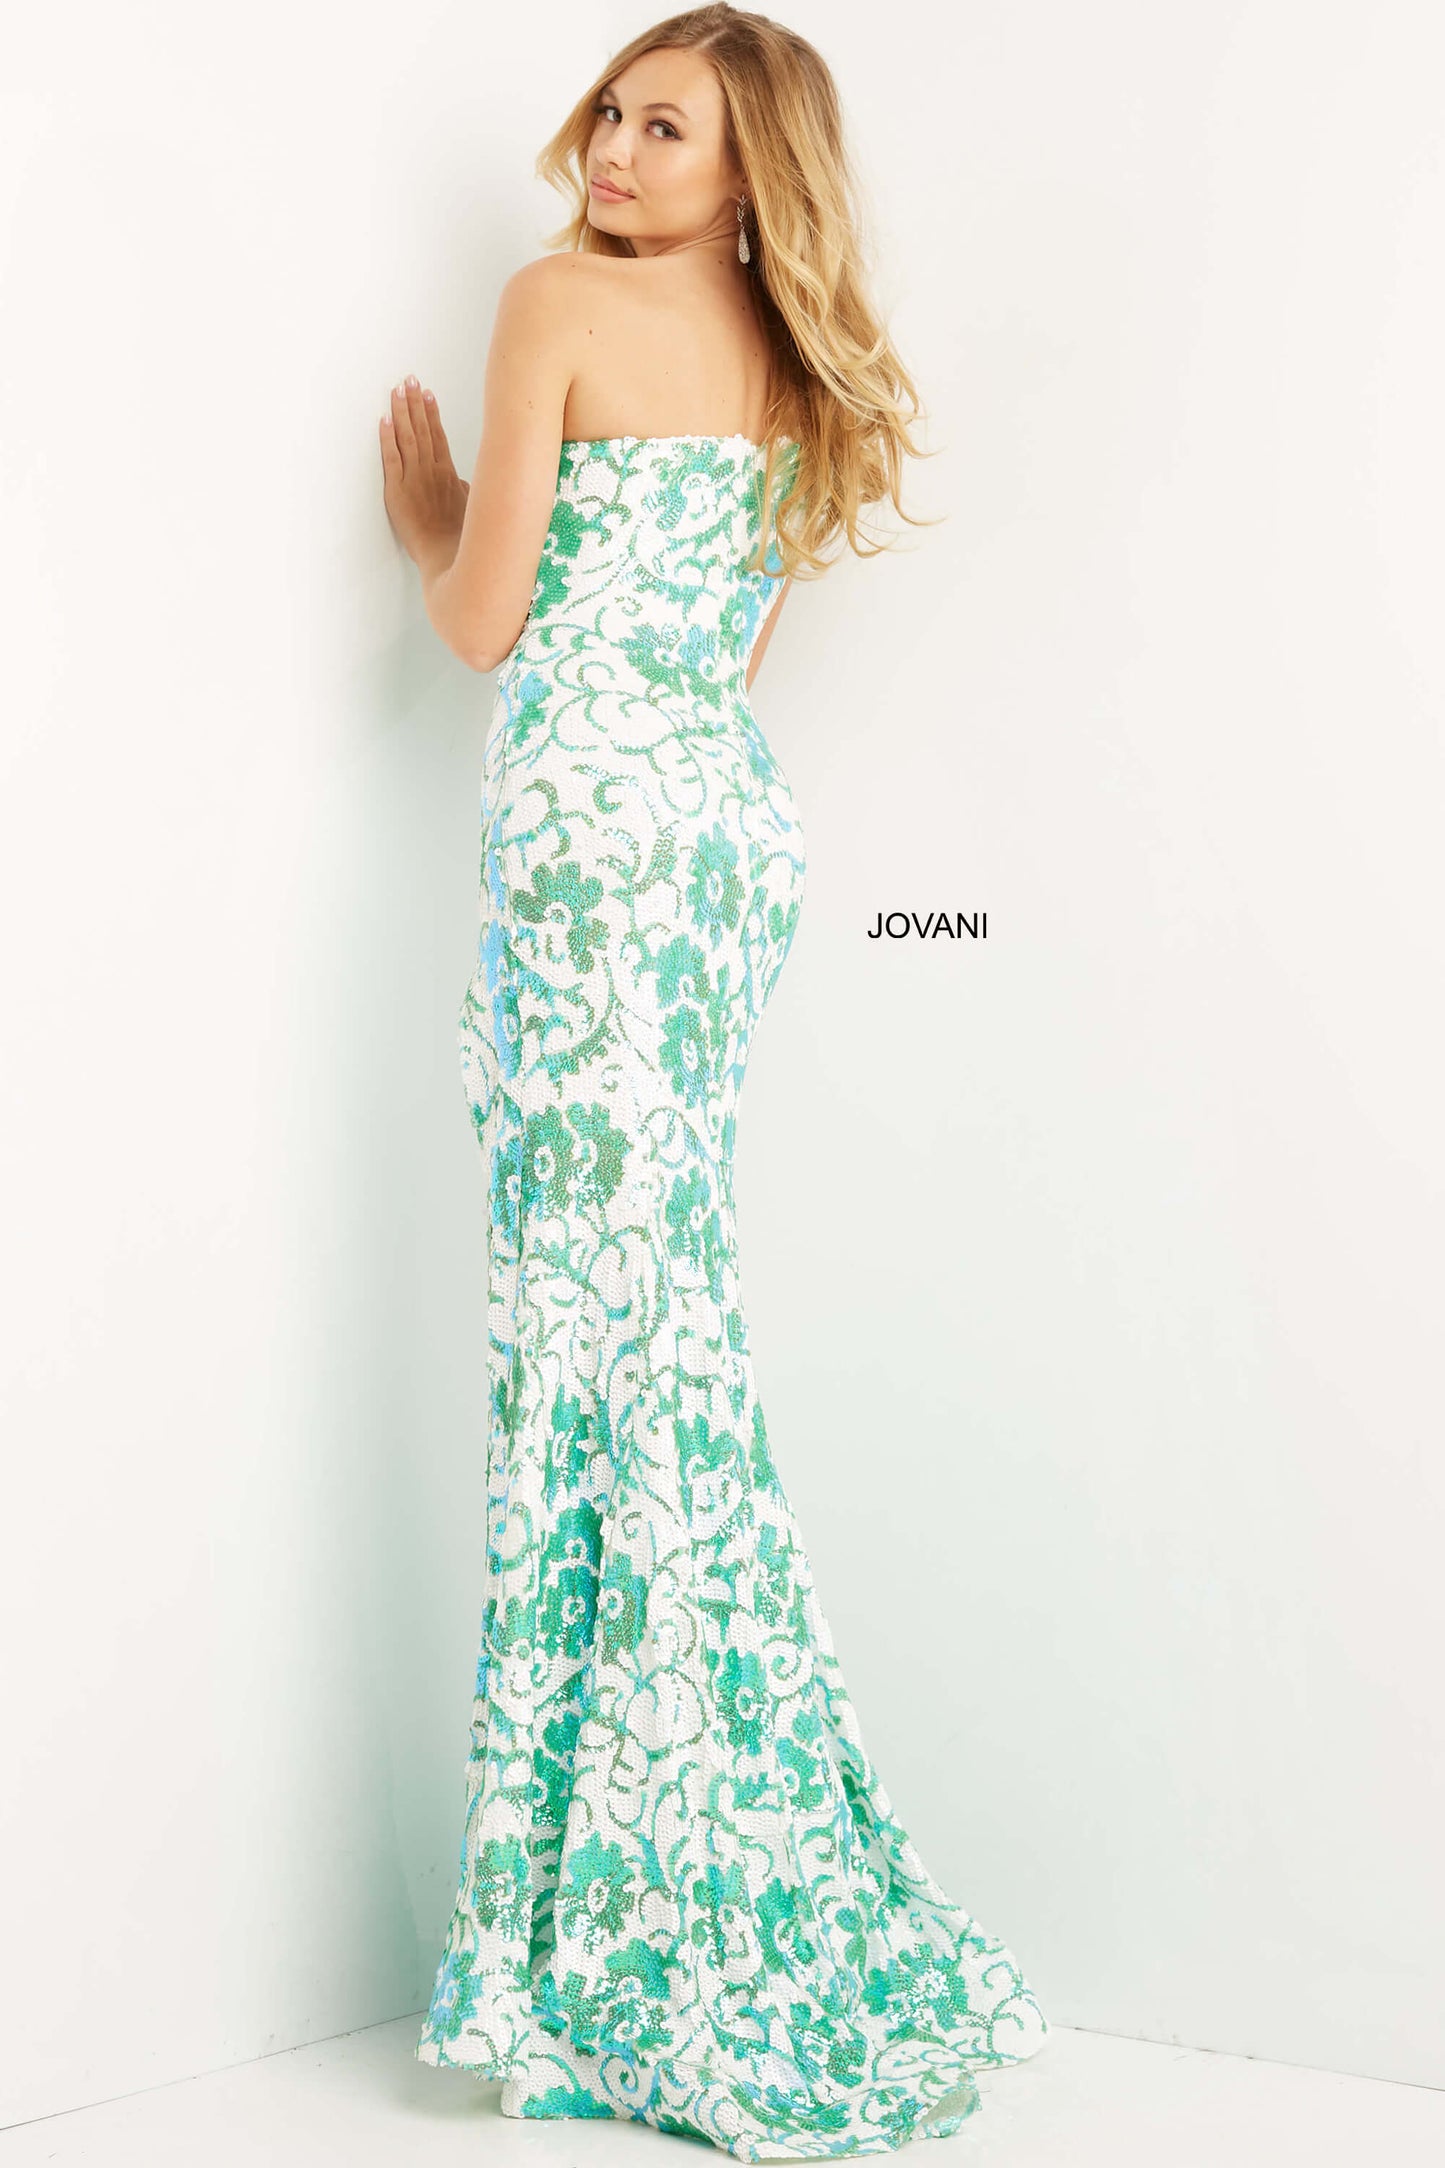 Jovani 08256 Long One Shoulder Sequin Floral Design Prom Pageant Gown. Jovani 08256 one-shoulder sequin prom dress is perfect for those who want to make a statement on their big night. The dress features a fitted silhouette that hugs the body in all the right places. The sequin fabric adds a touch of sparkle and shine, ensuring you'll turn heads as soon as you enter the room. The one-shoulder design adds a touch of elegance to the overall look, making it perfect for a prom or any formal event!